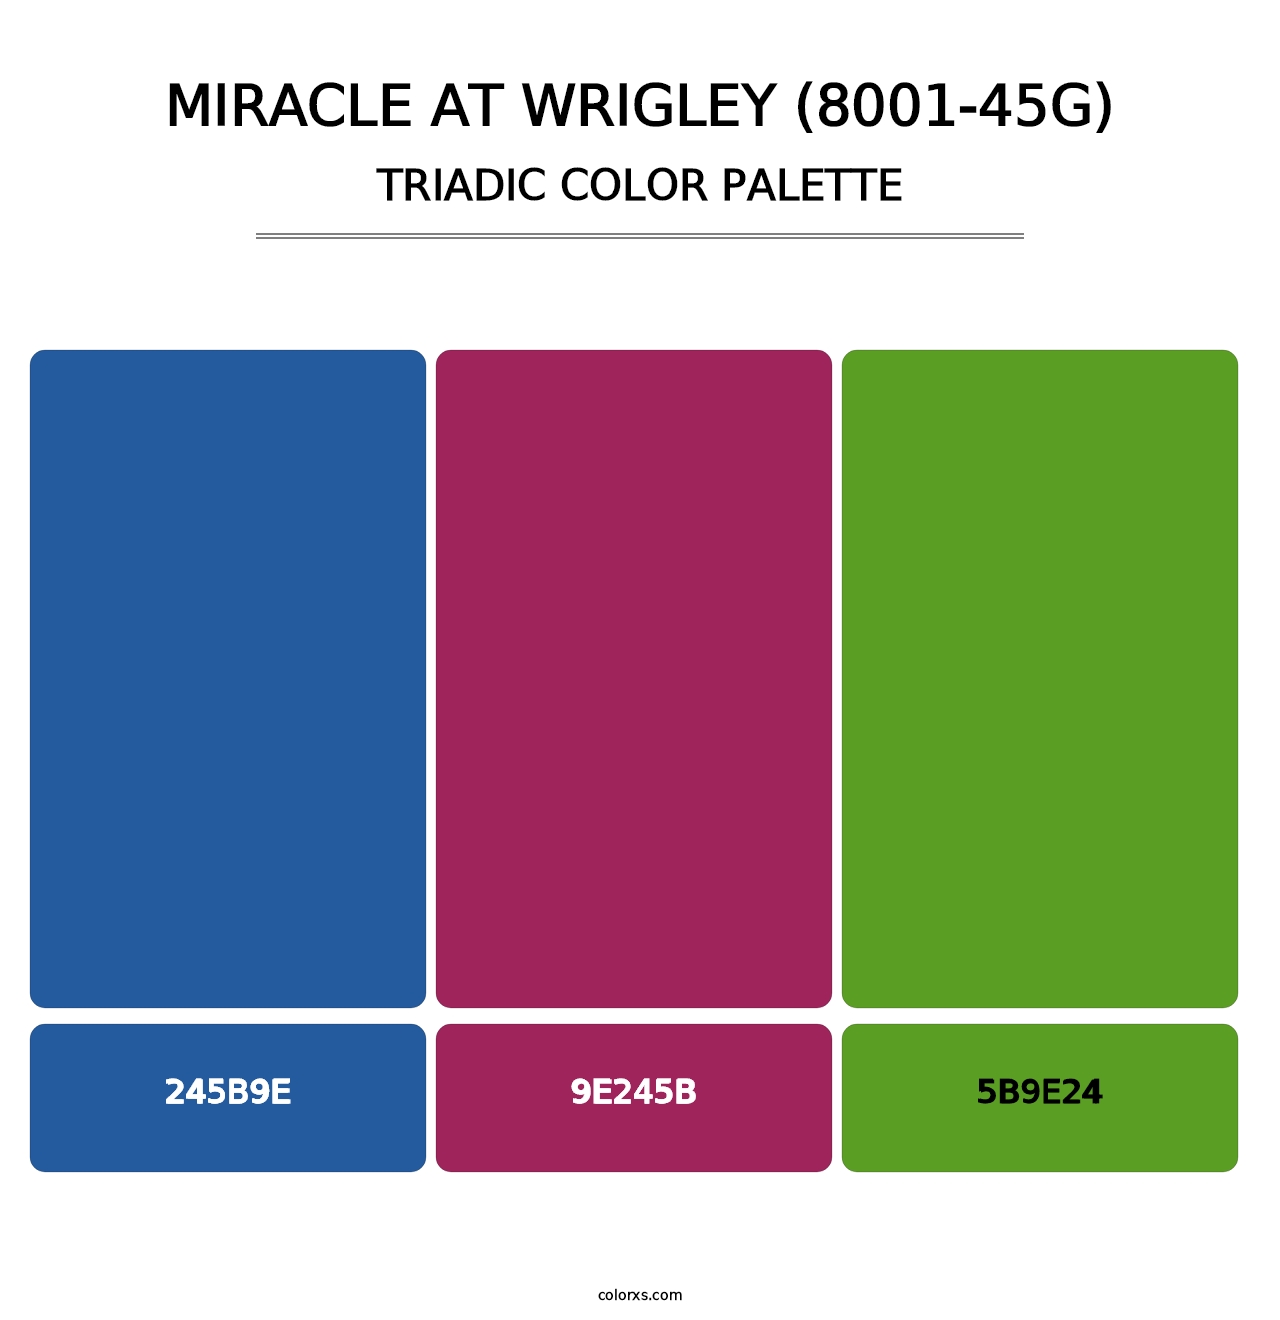 Miracle at Wrigley (8001-45G) - Triadic Color Palette